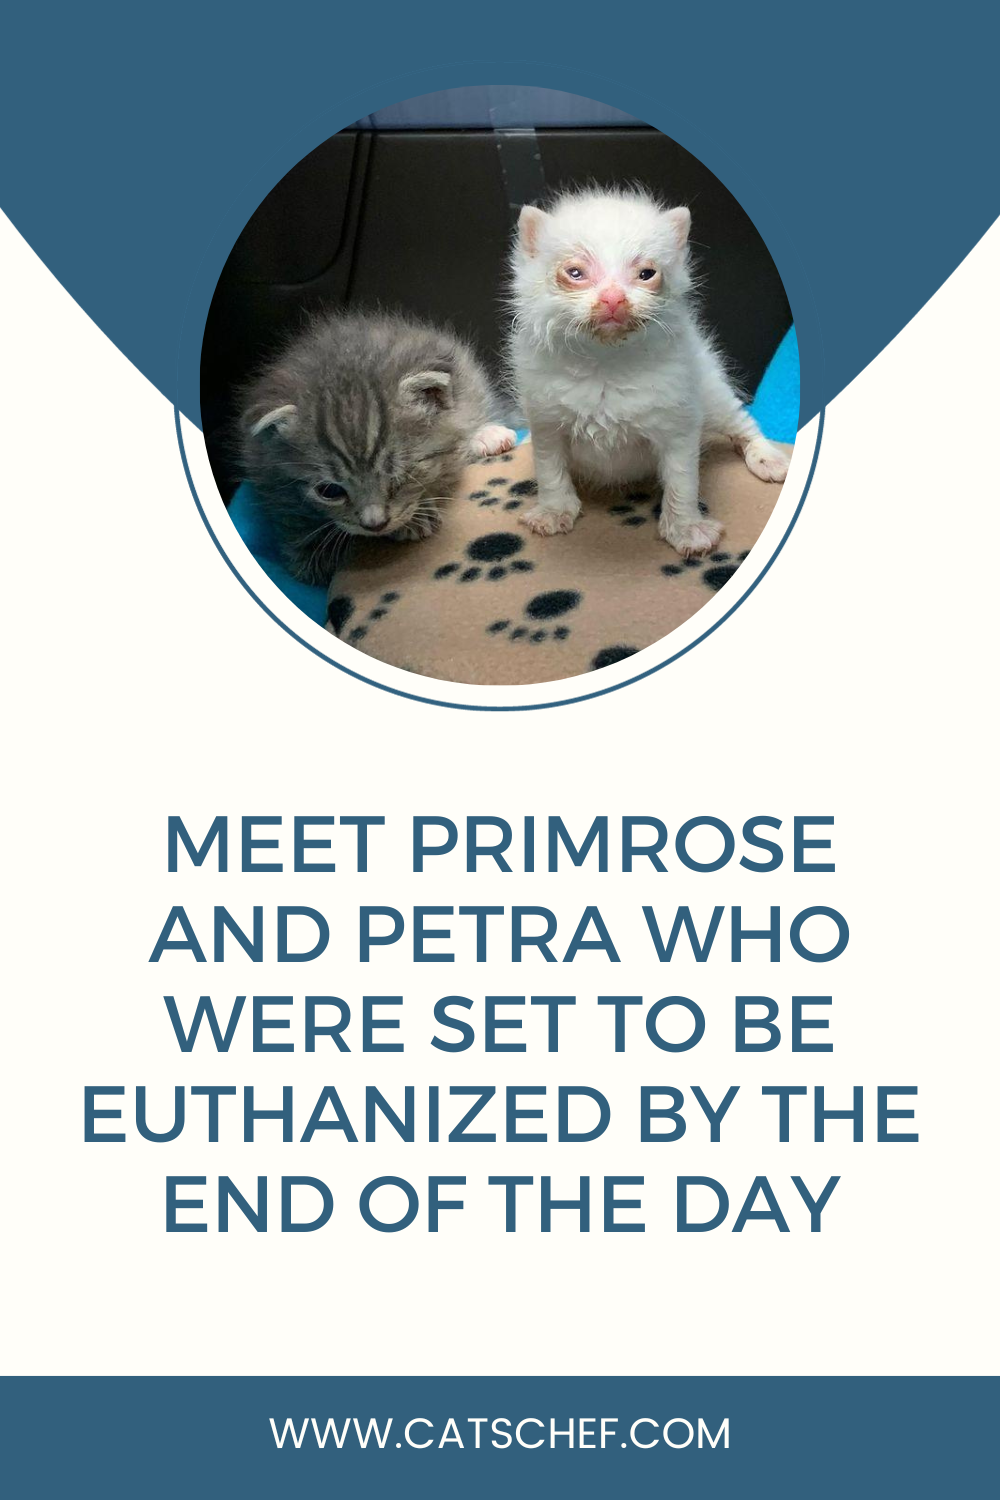 Meet Primrose And Petra Who Were Set To Be Euthanized By The End Of The Day